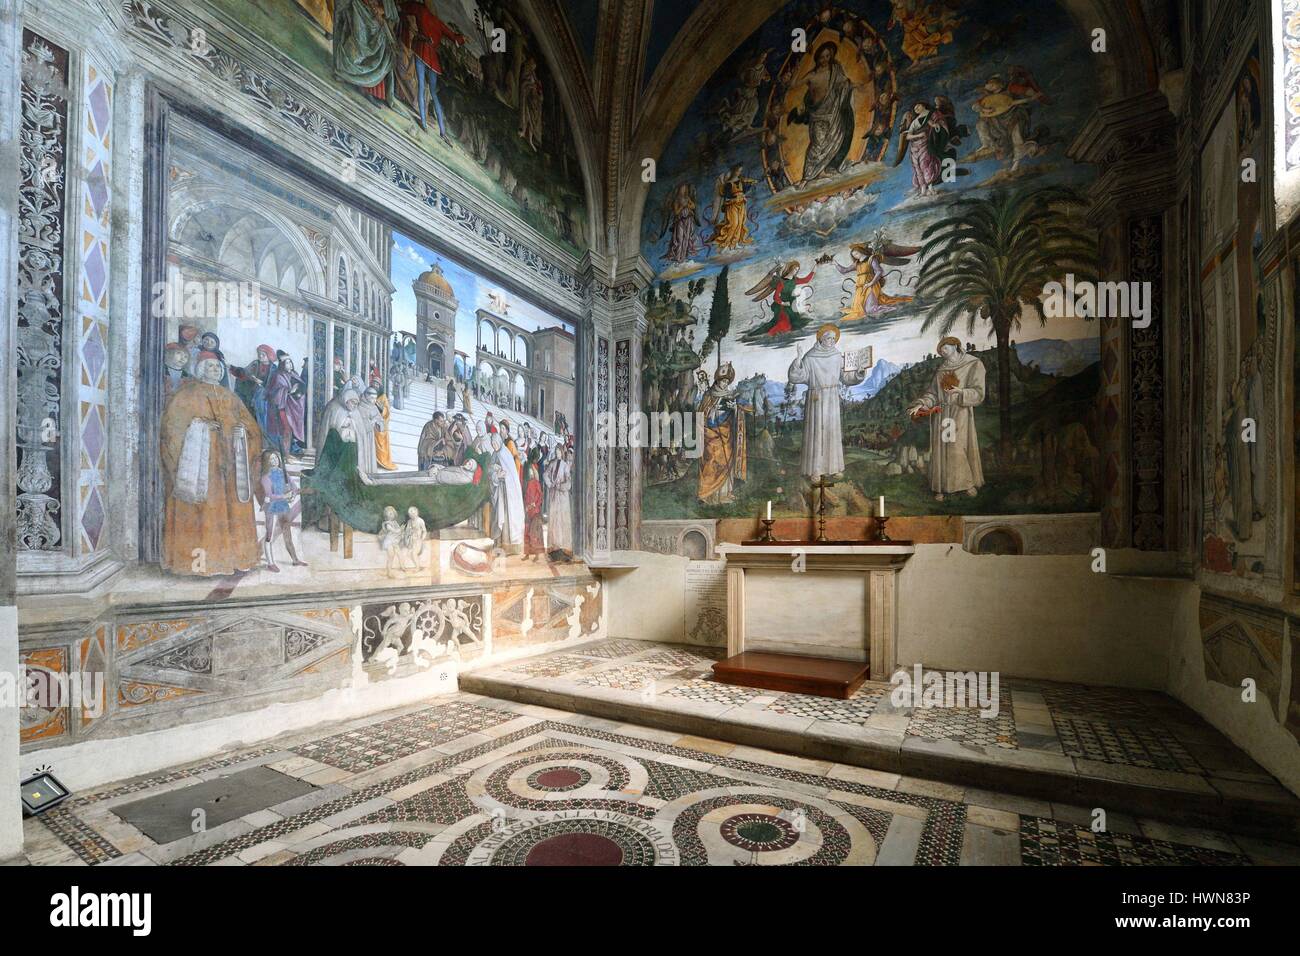 Italy, Lazio, Rome, historical centre listed as World Heritage by UNESCO, Piazza del Campidoglio (Capitole square), the Basilica Santa Maria in Aracoeli on the highest summit of the Capitoline hill, which foundation dated 6th century, San Bernardino Chapel, Pinturicchio paintings Stock Photo